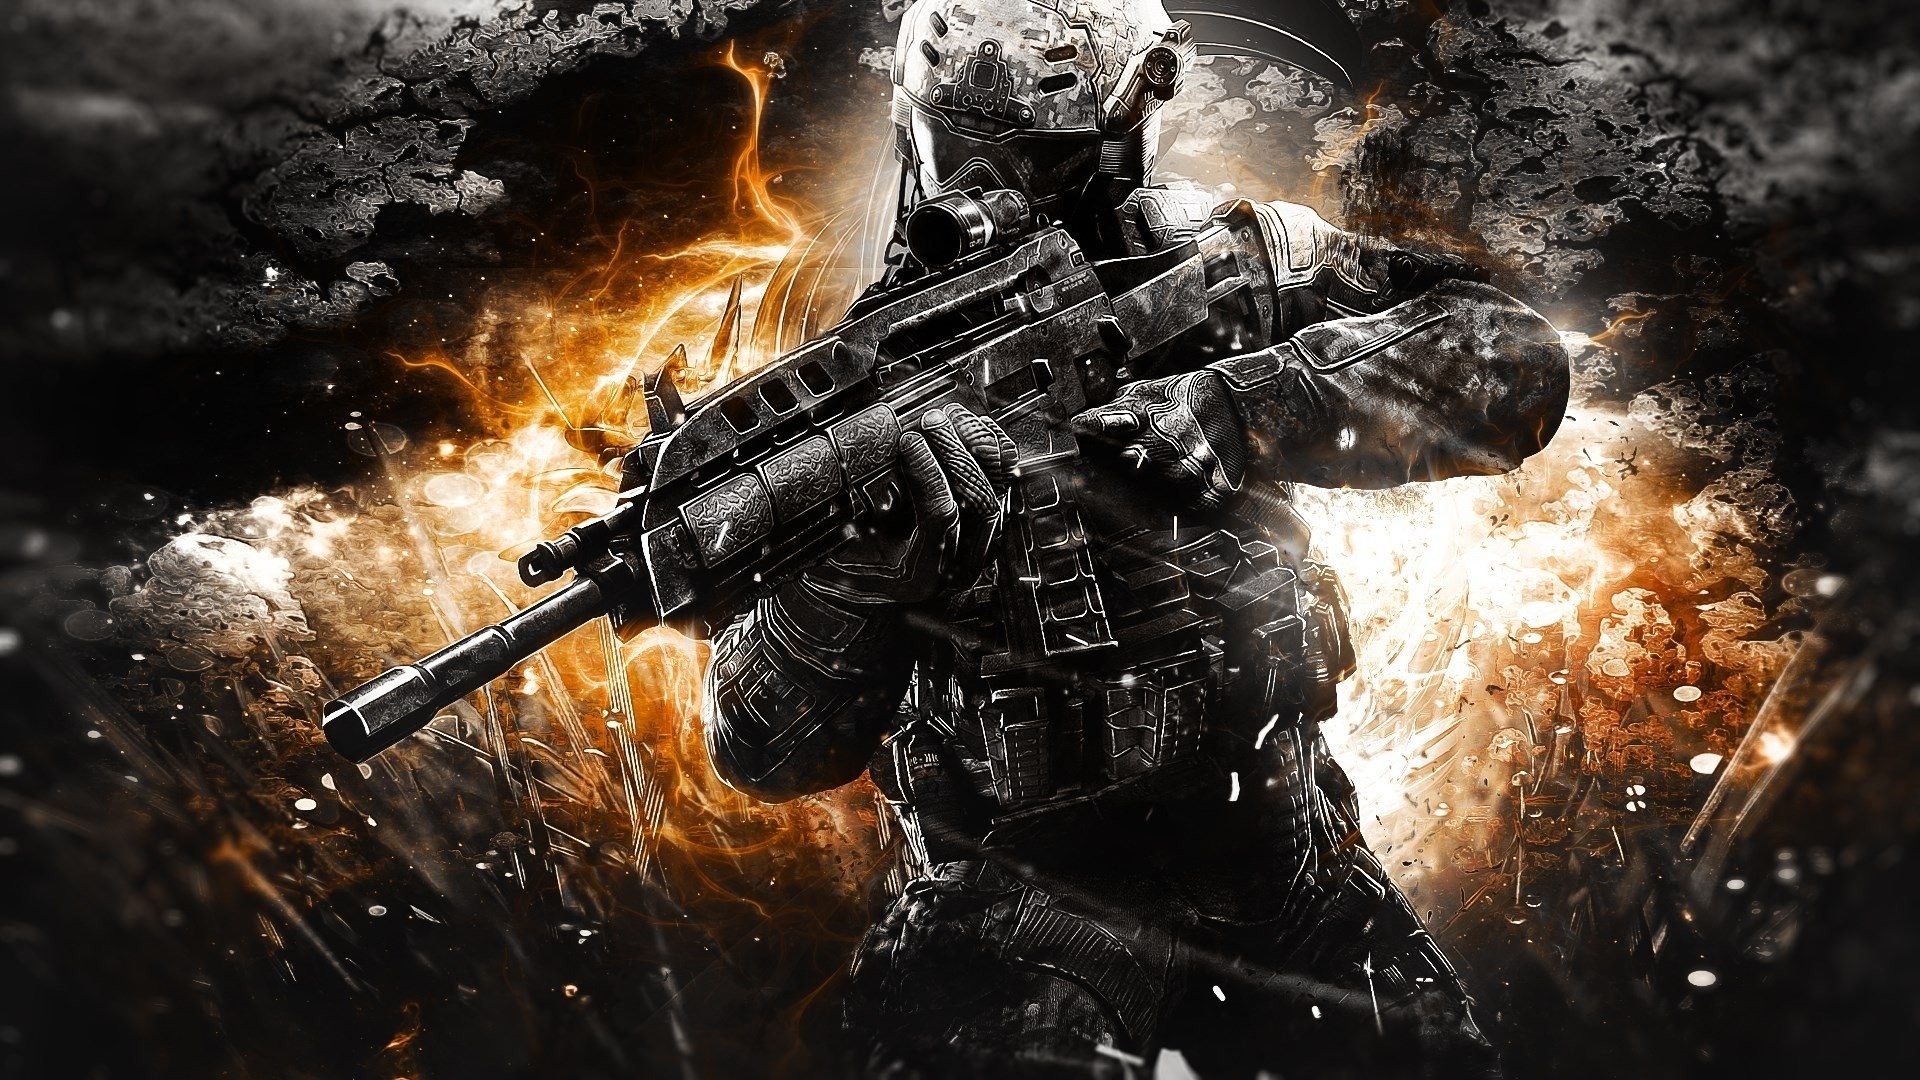 1920x1080 Call Of Duty Wallpapers Black Ops 2 Wallpapers) – HD Wallpapers